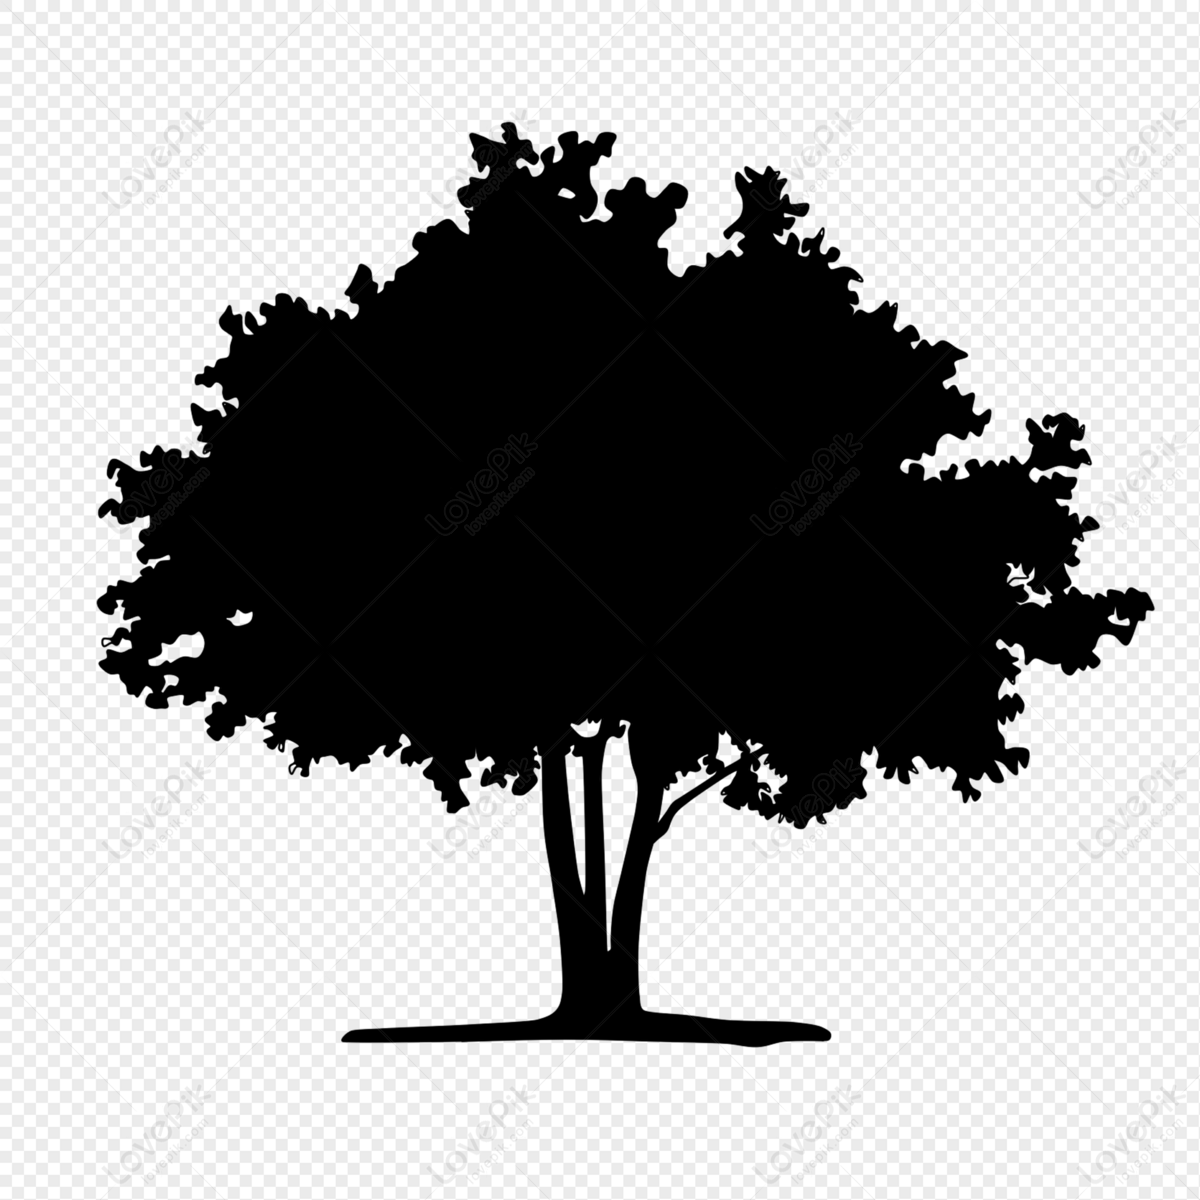 Tree silhouette, tree, black and white, natural png picture